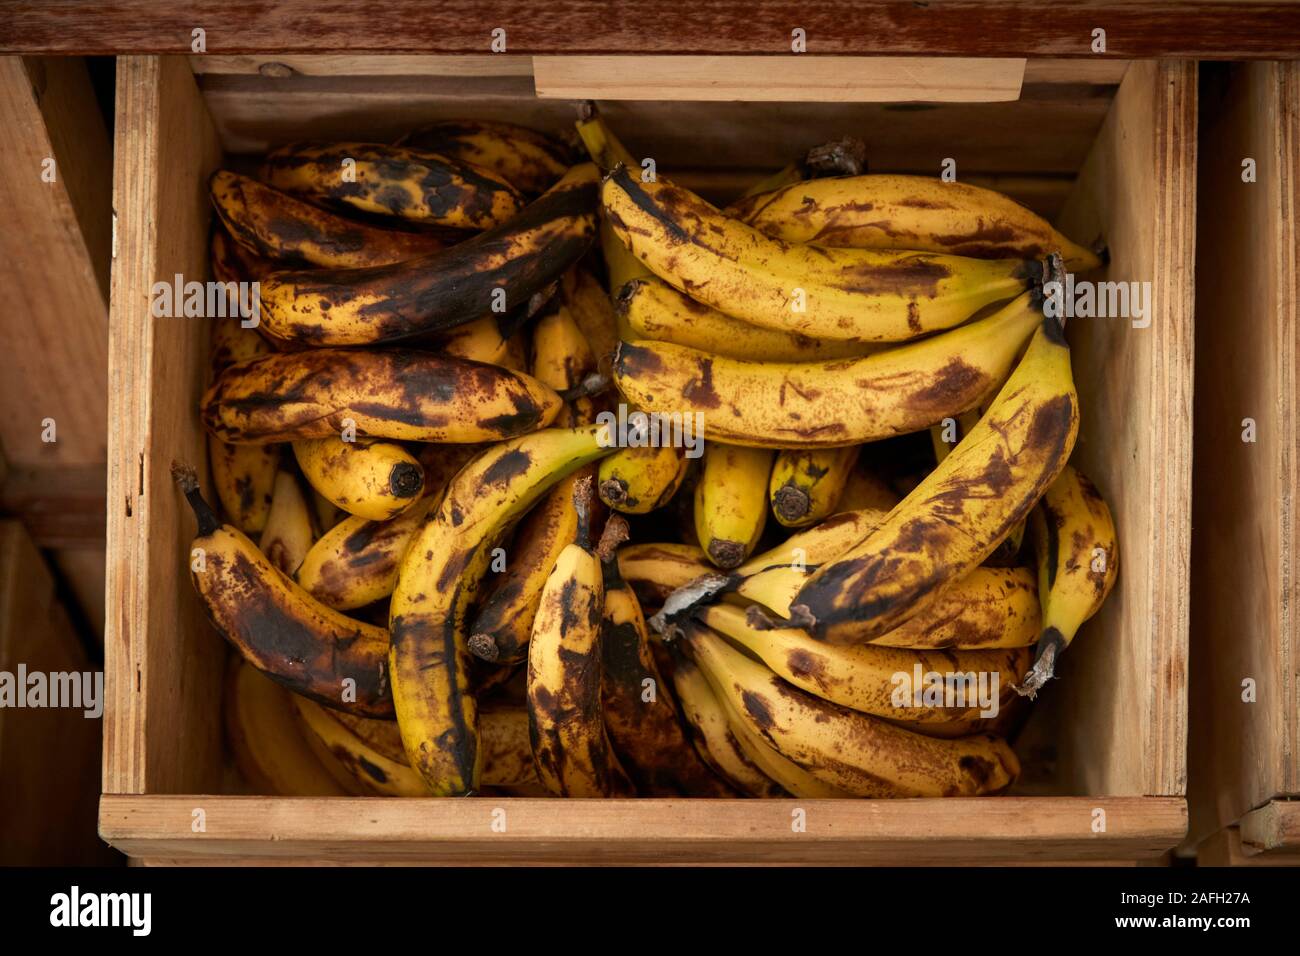 Display Of Bananas In Sustainable Plastic Packaging Free Grocery Store Stock Photo